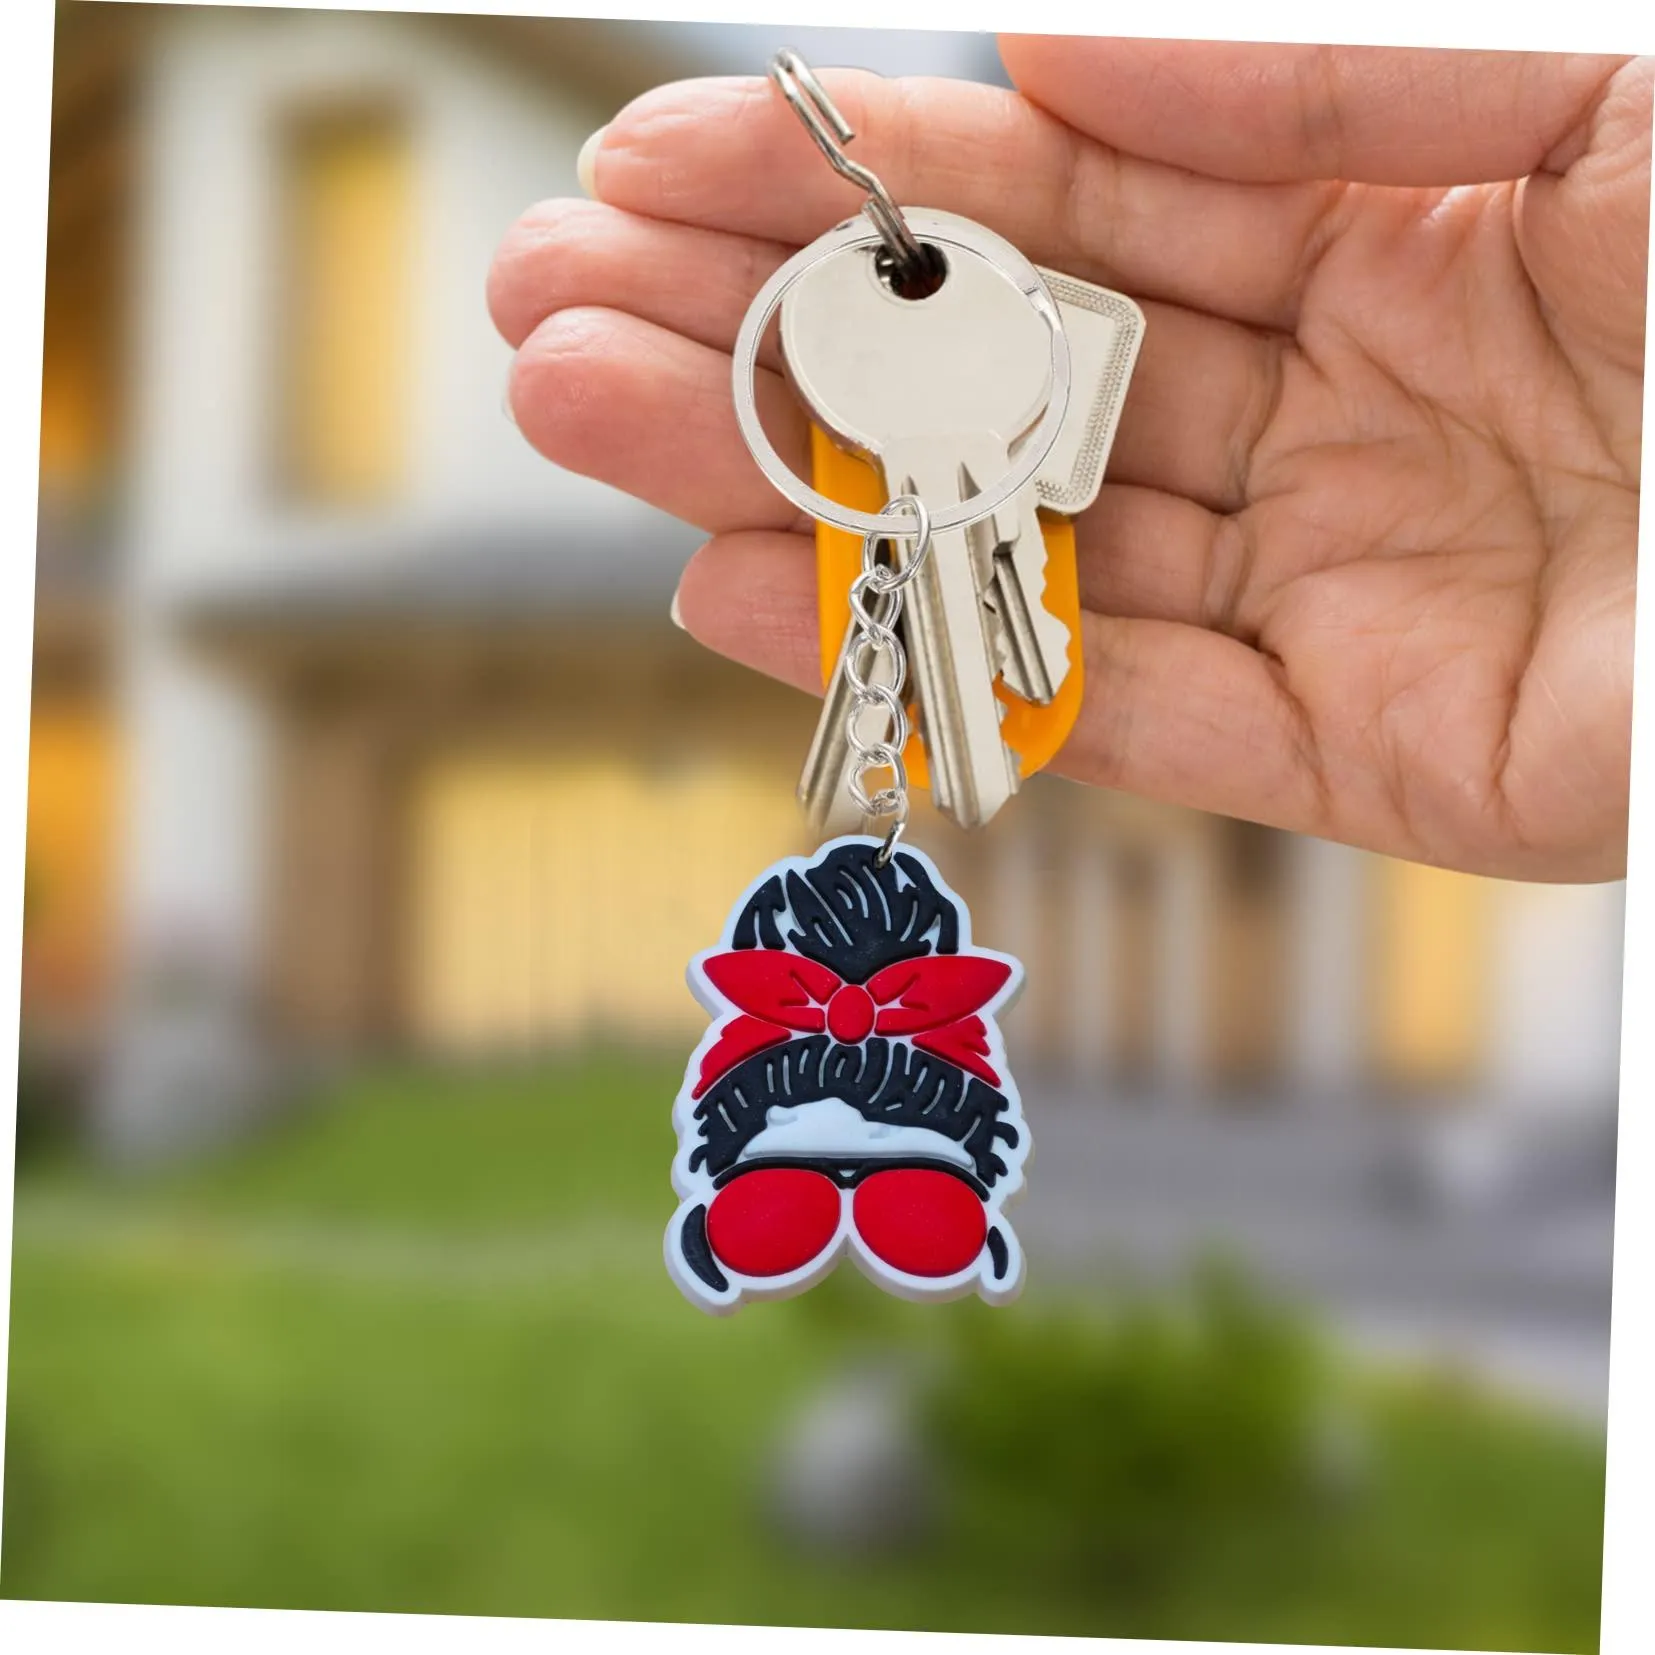 momlife keychain keyring for school bags backpack kids party favors goodie bag stuffers supplies suitable schoolbag key ring men keychains women